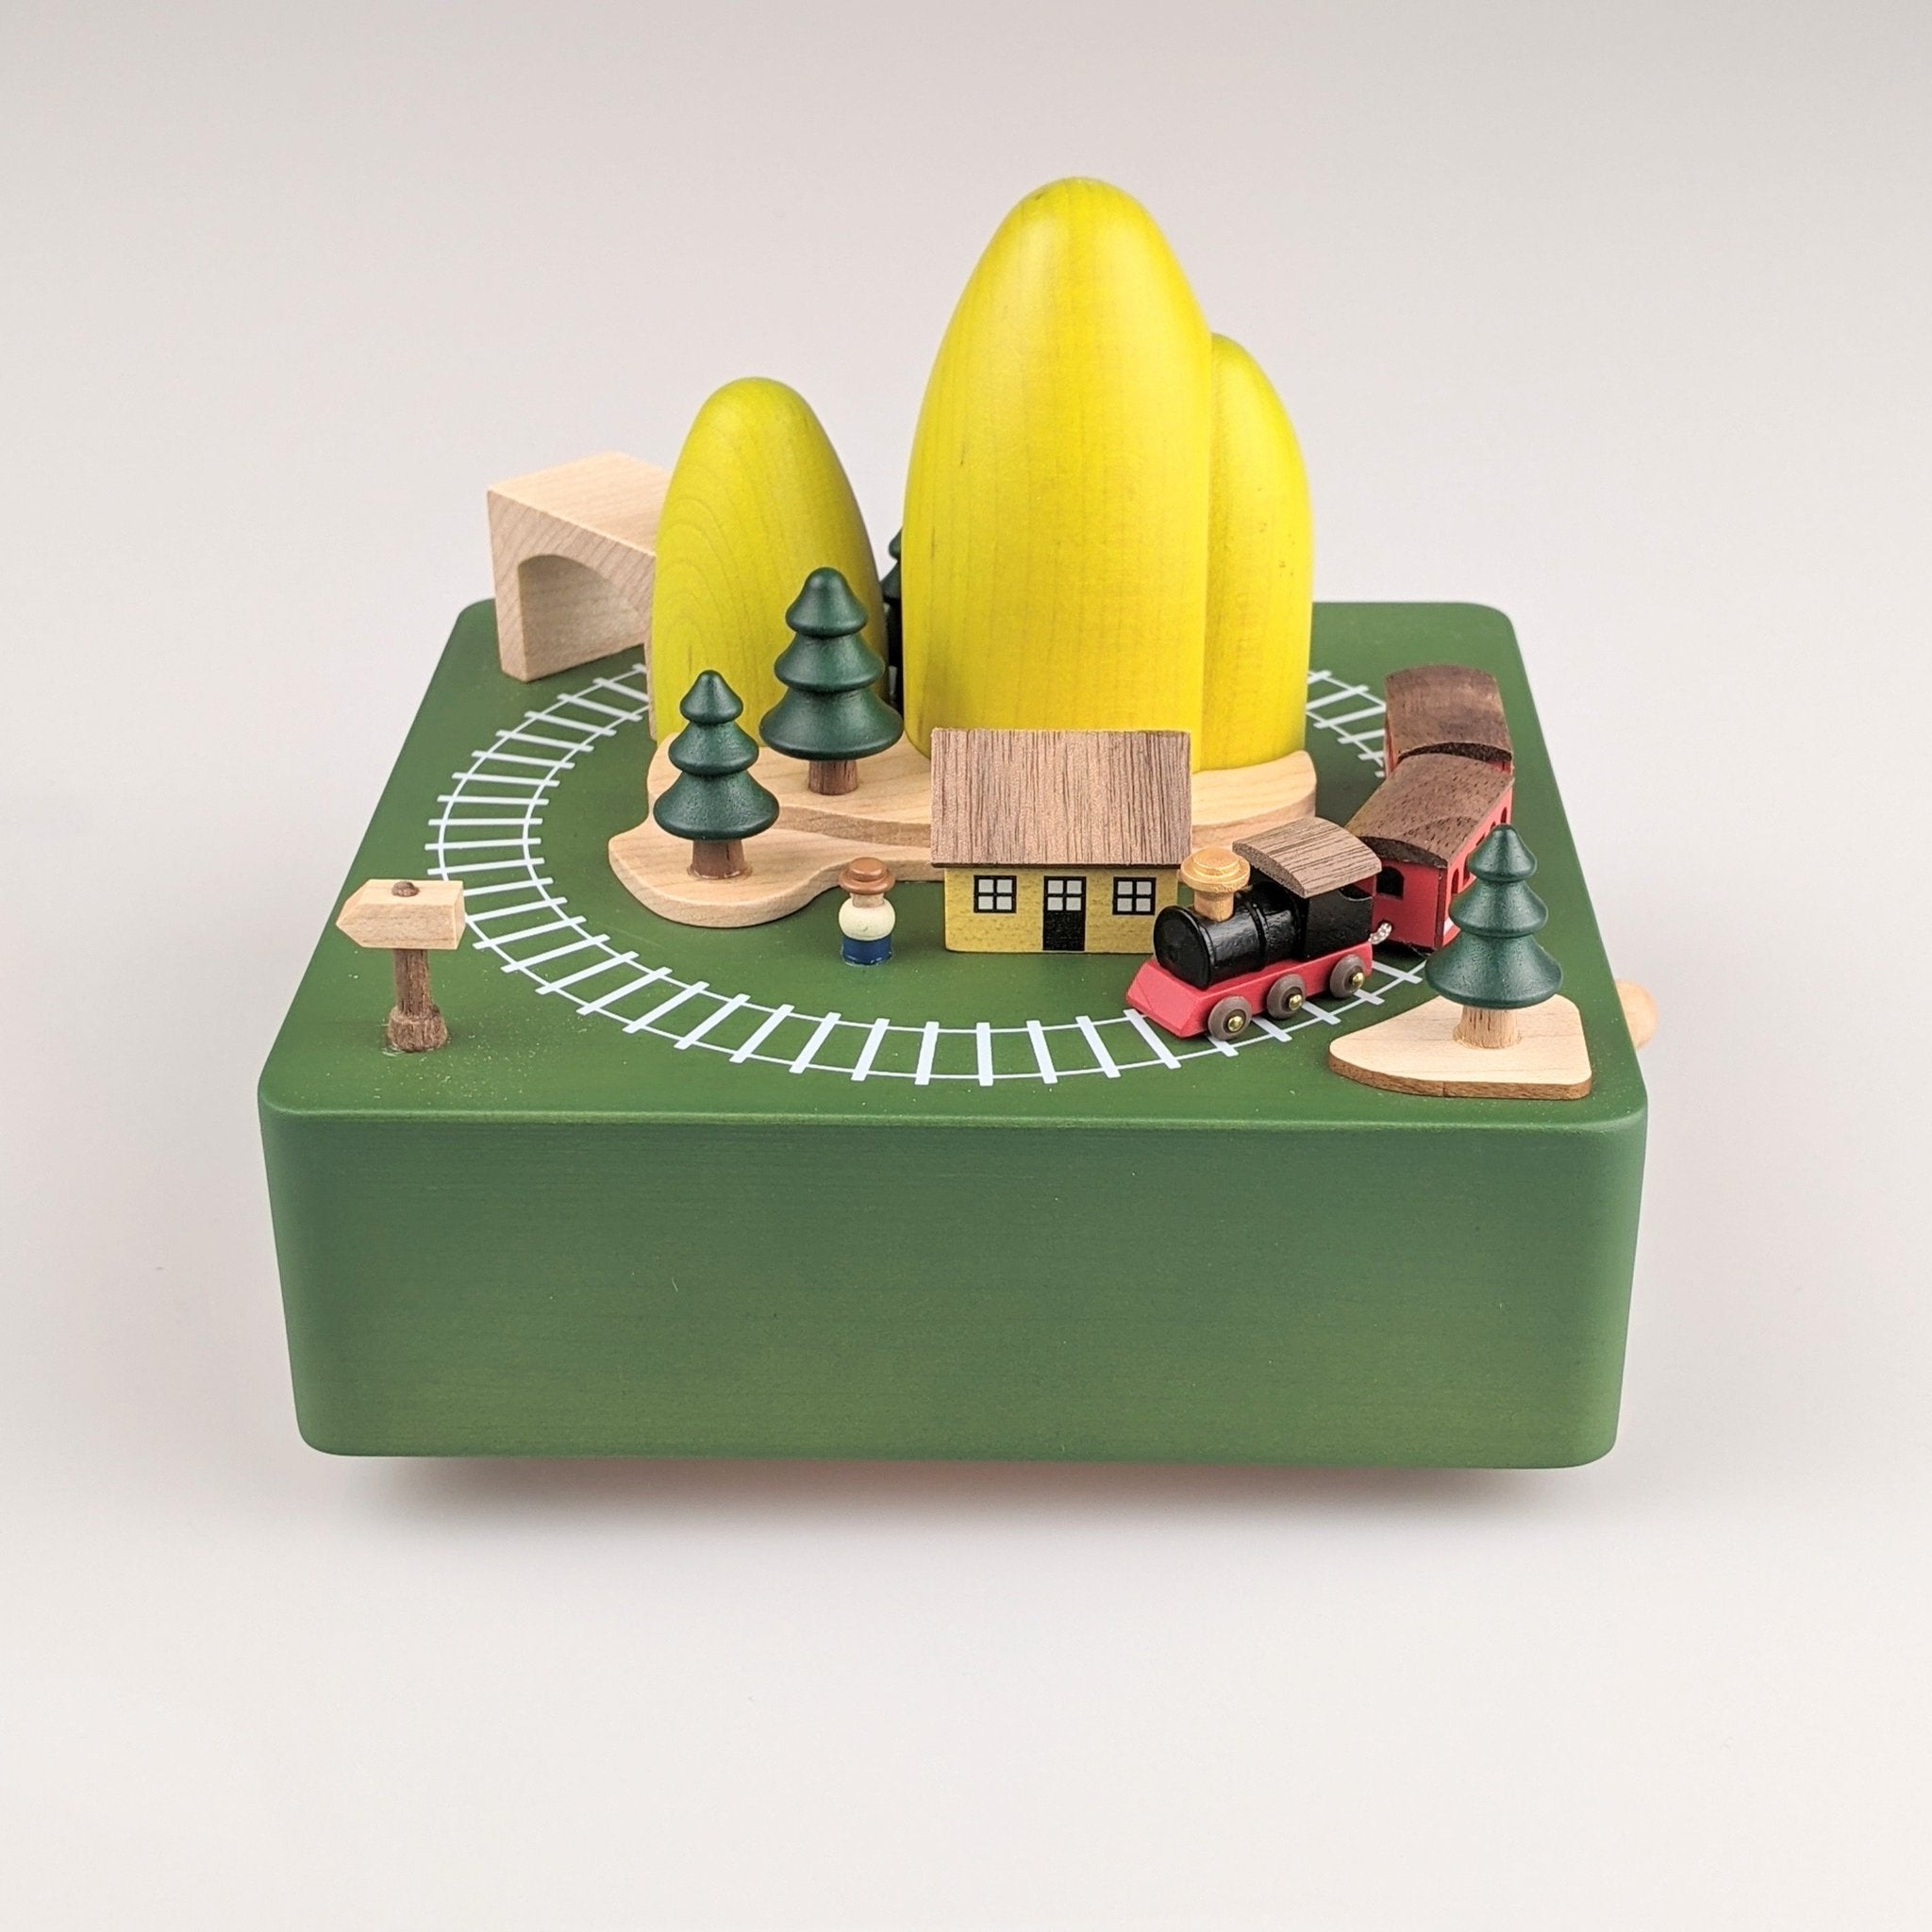 Wooden music box with train going around a mountain